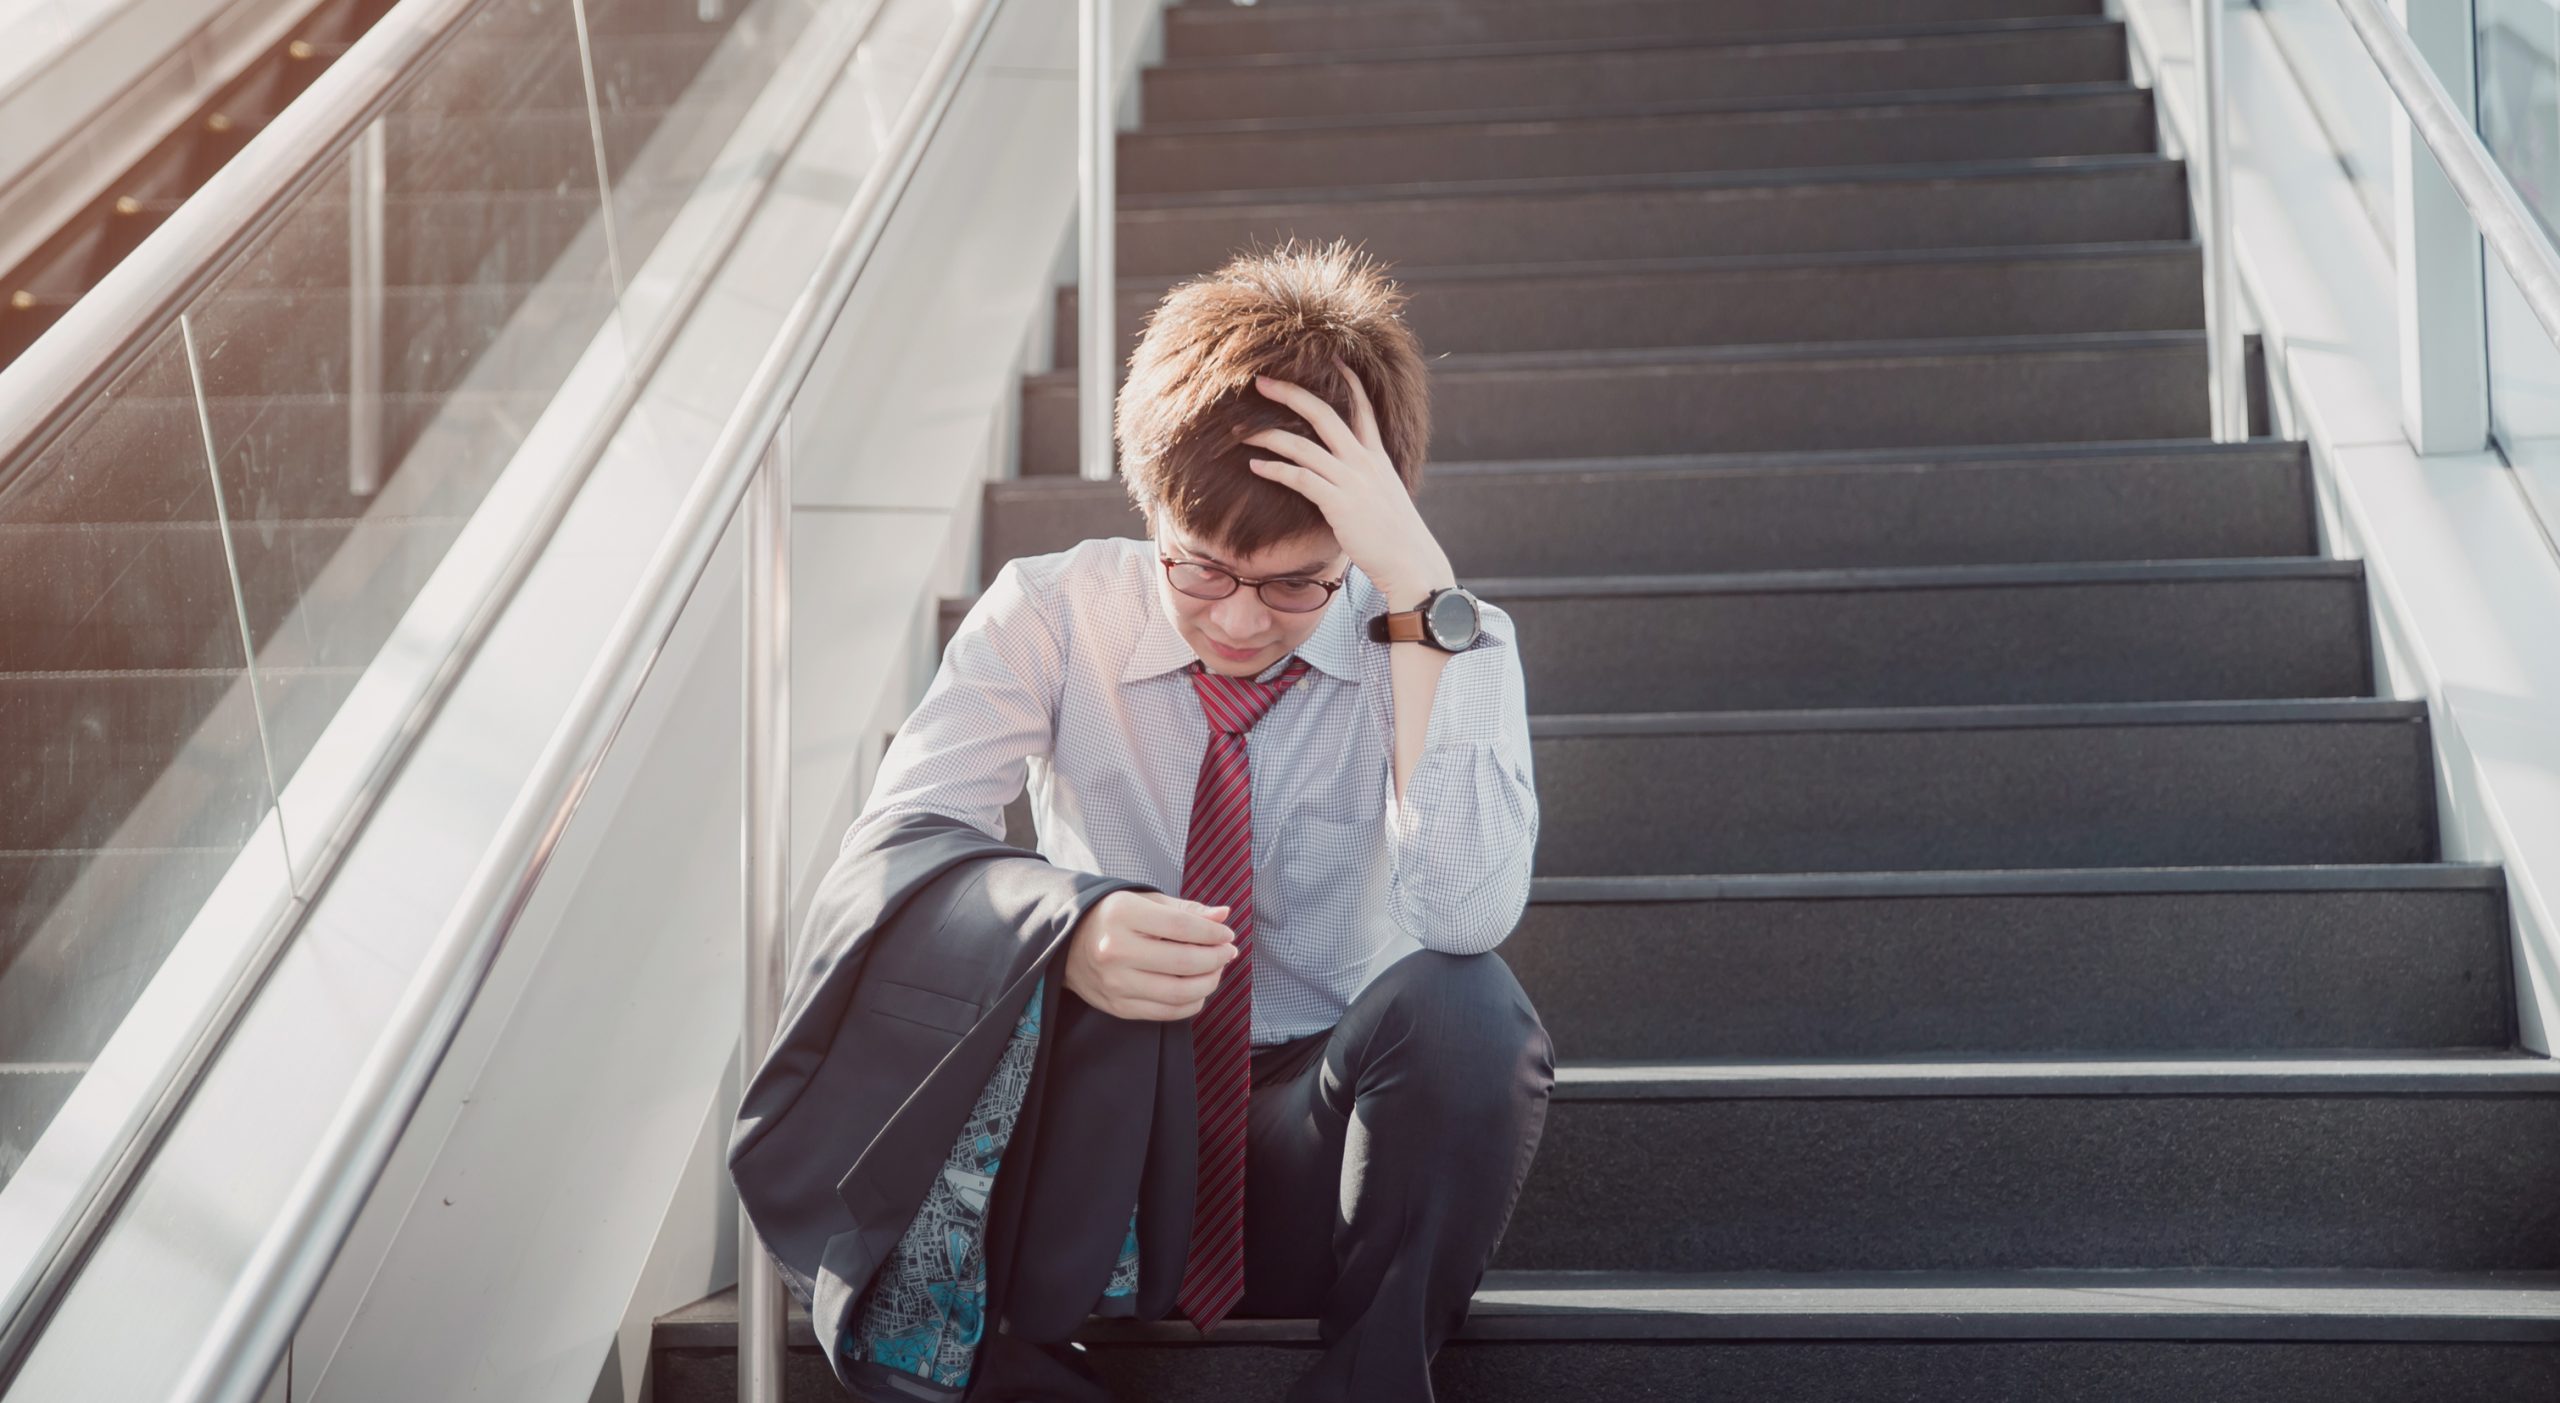 9 Workable Ways To Overcome Anxiety (At work)